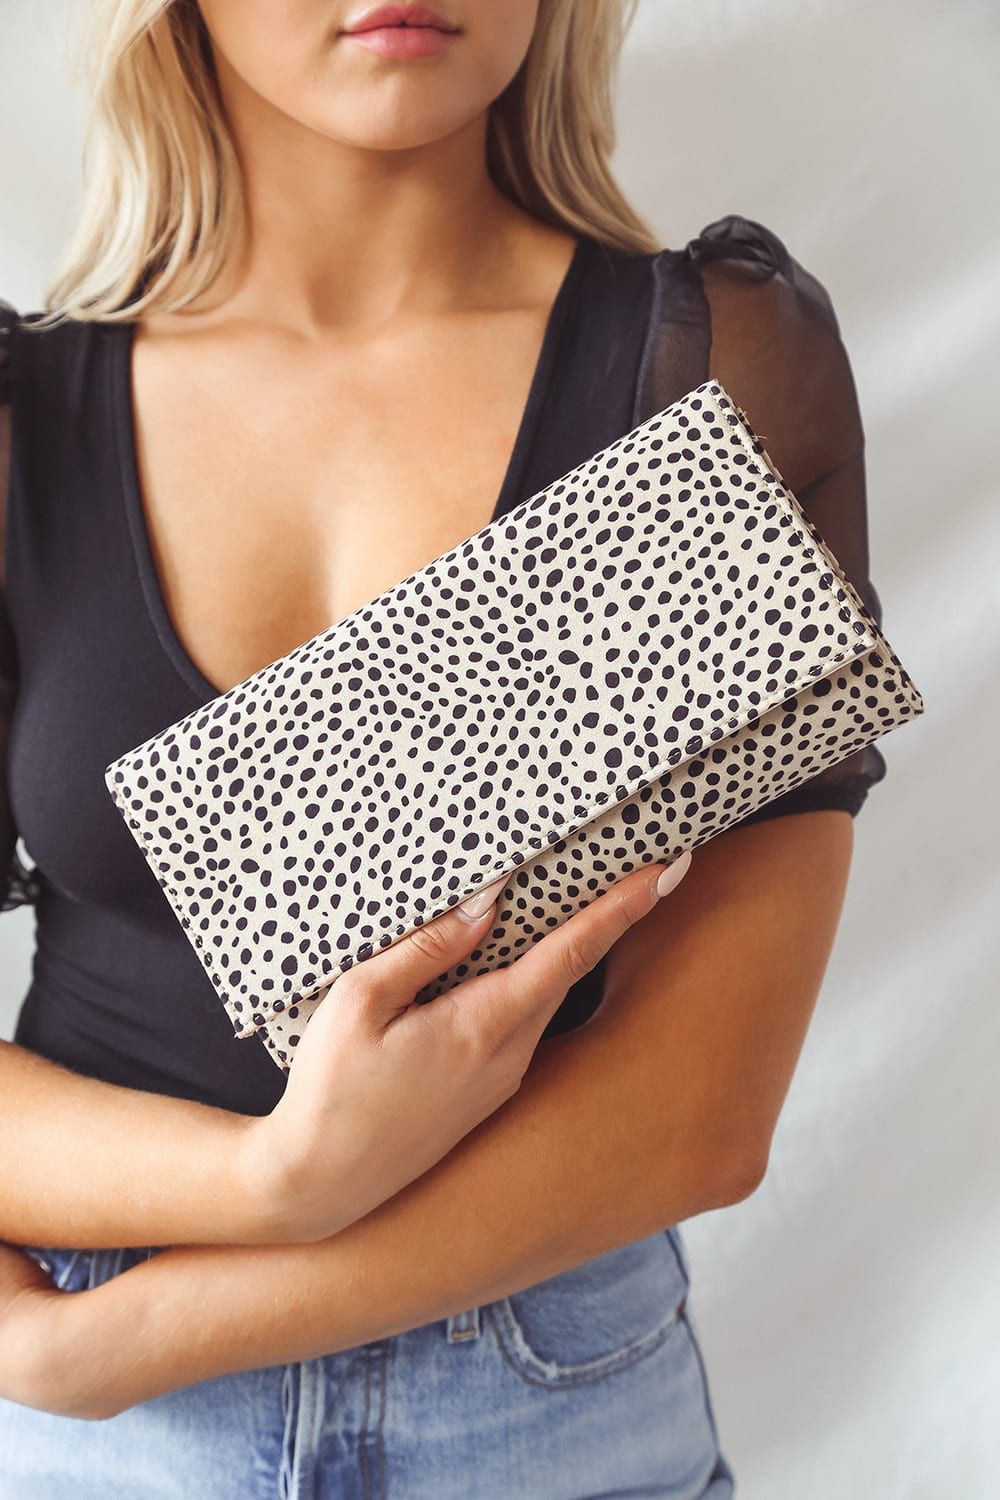 We're Going Out Beige Cheetah Print Clutch | Lulus (US)